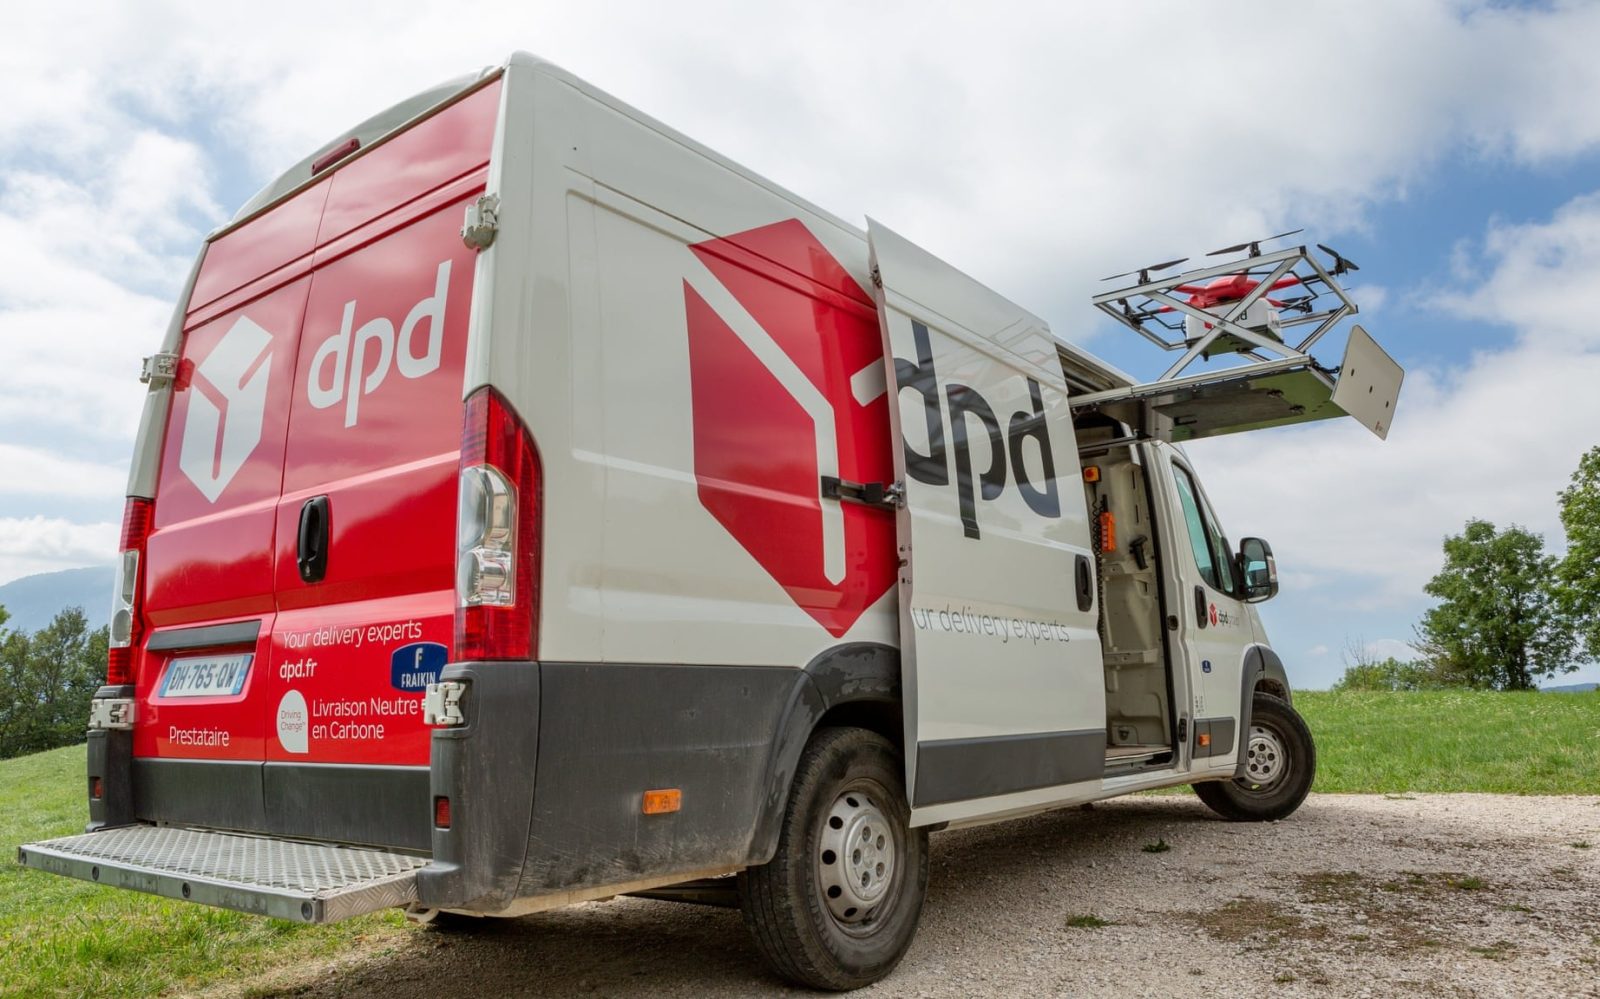 DPD France parcel delivery drones making waves on social media - Urban Air Mobility News